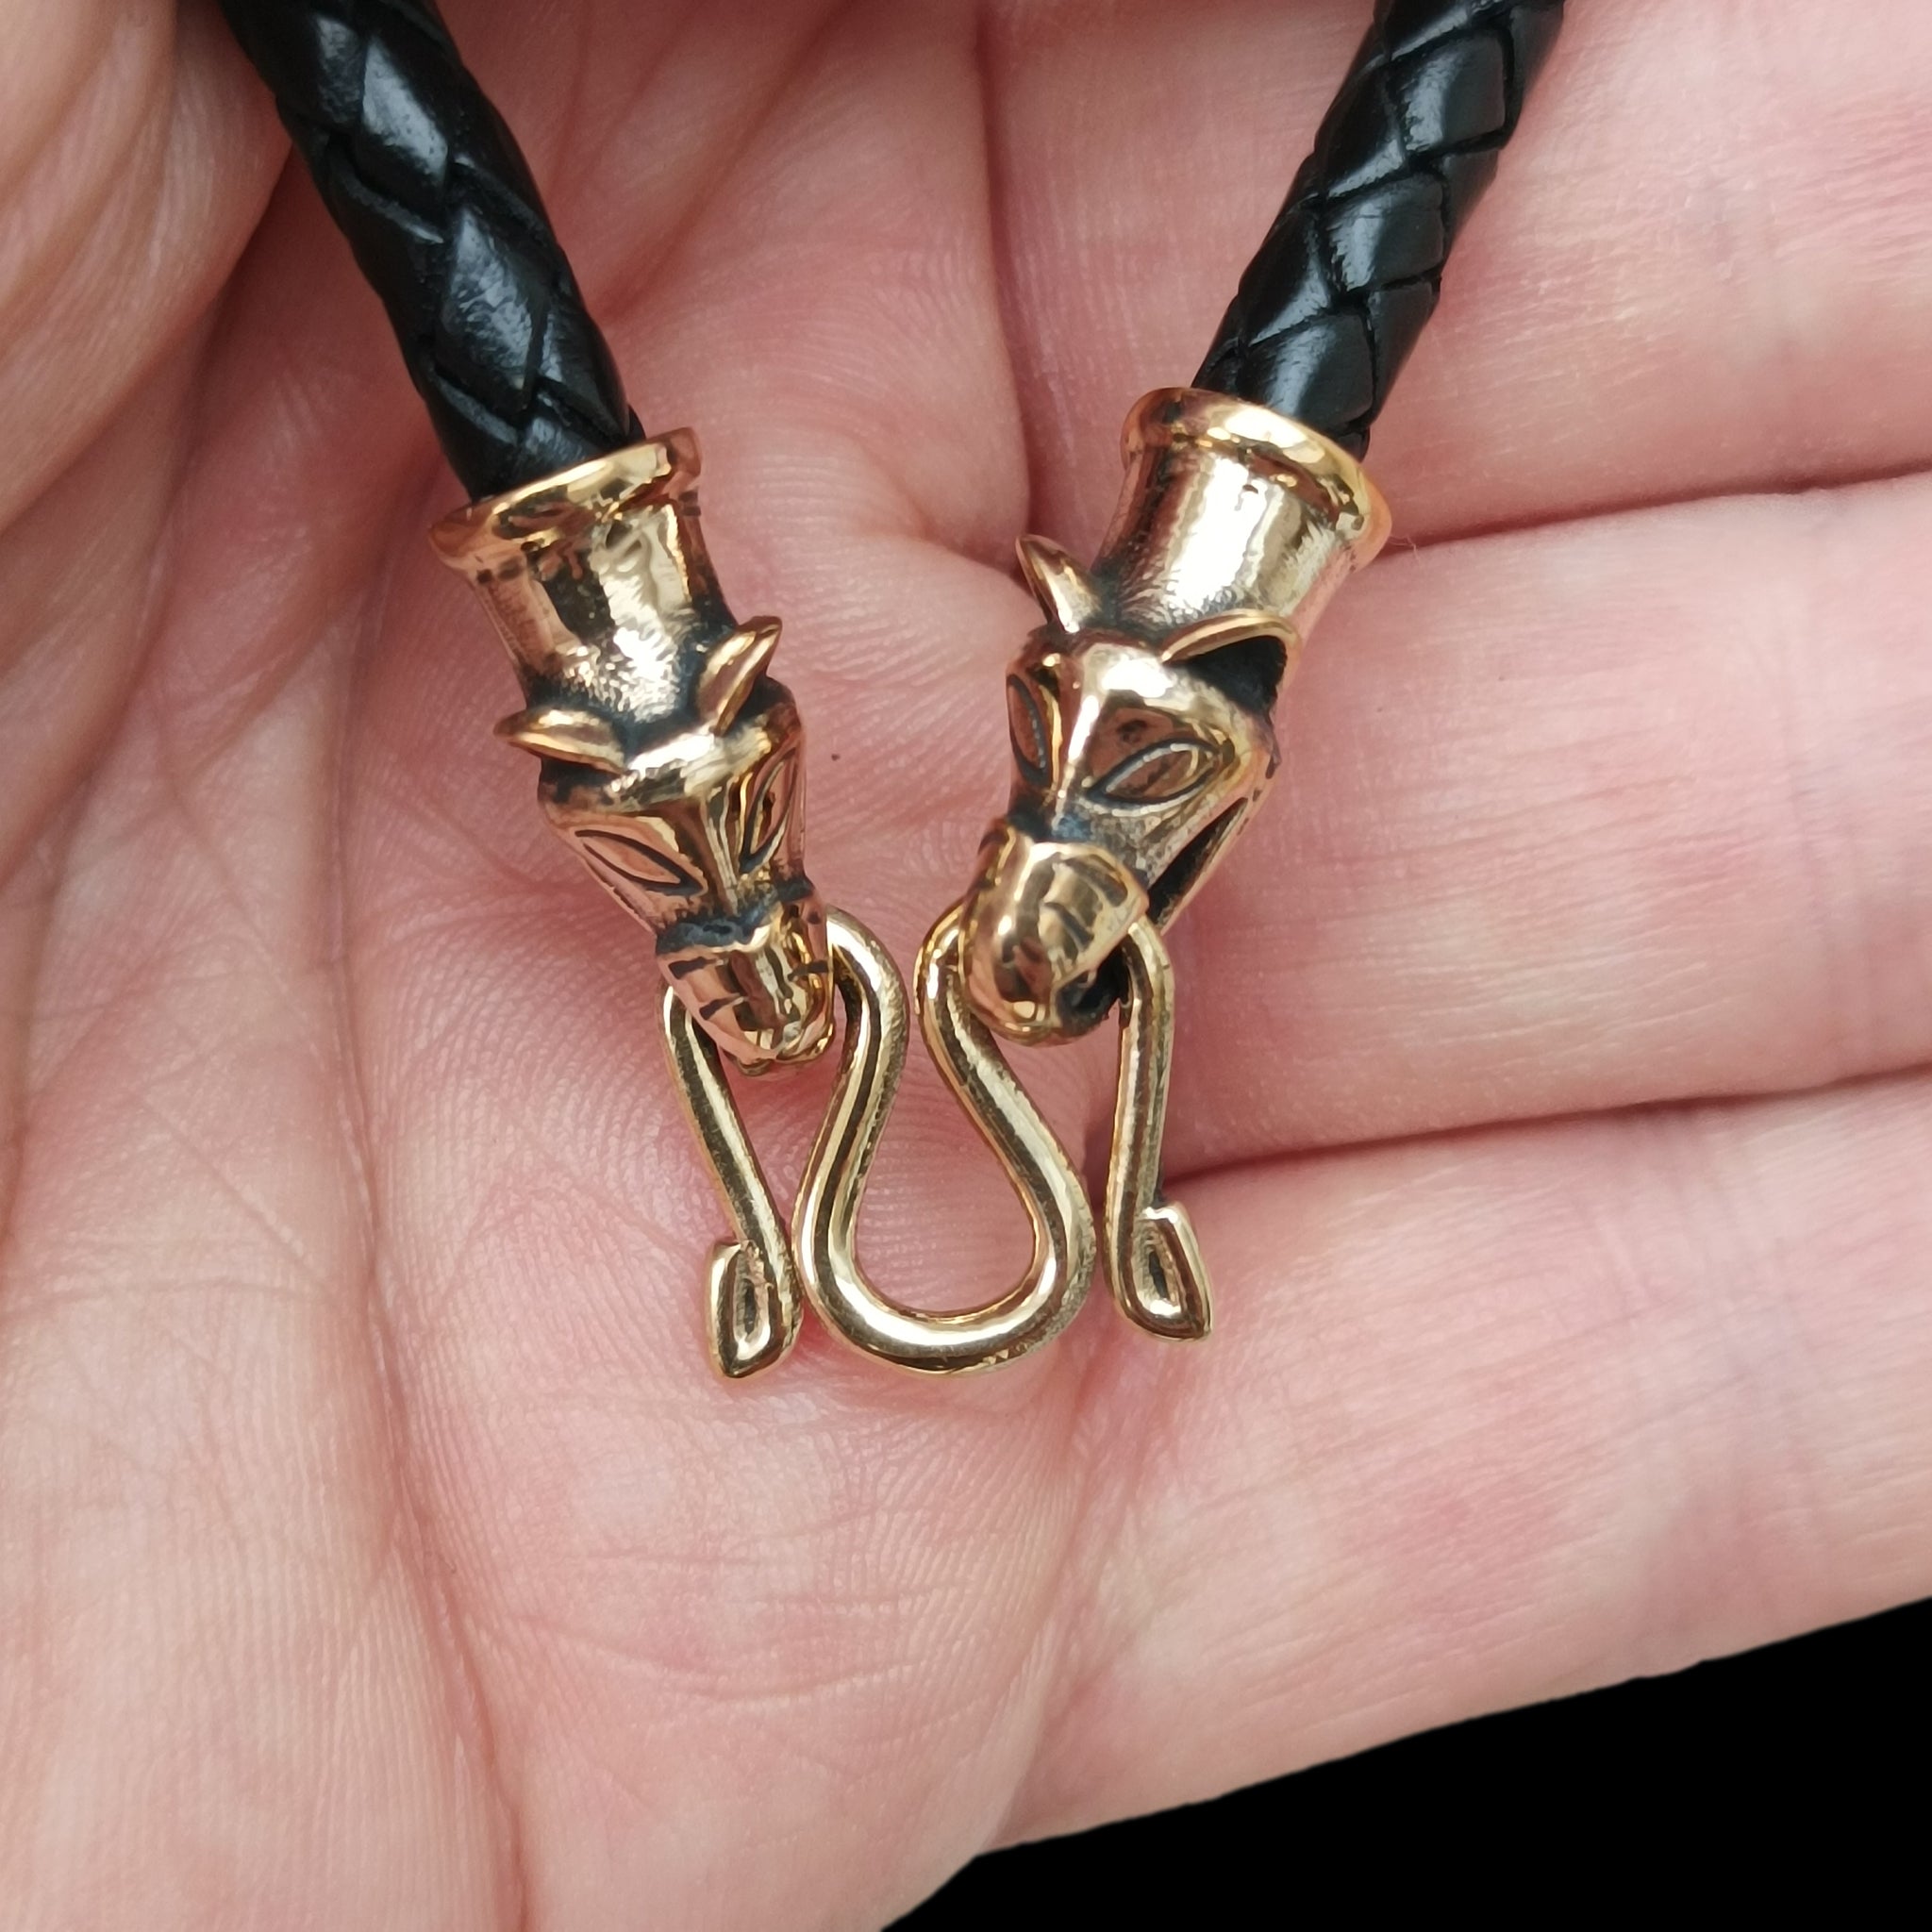 5mm Width Braided Leather Necklace with Bronze Icelandic Wolf Heads and Butterfly Fitting in Hand